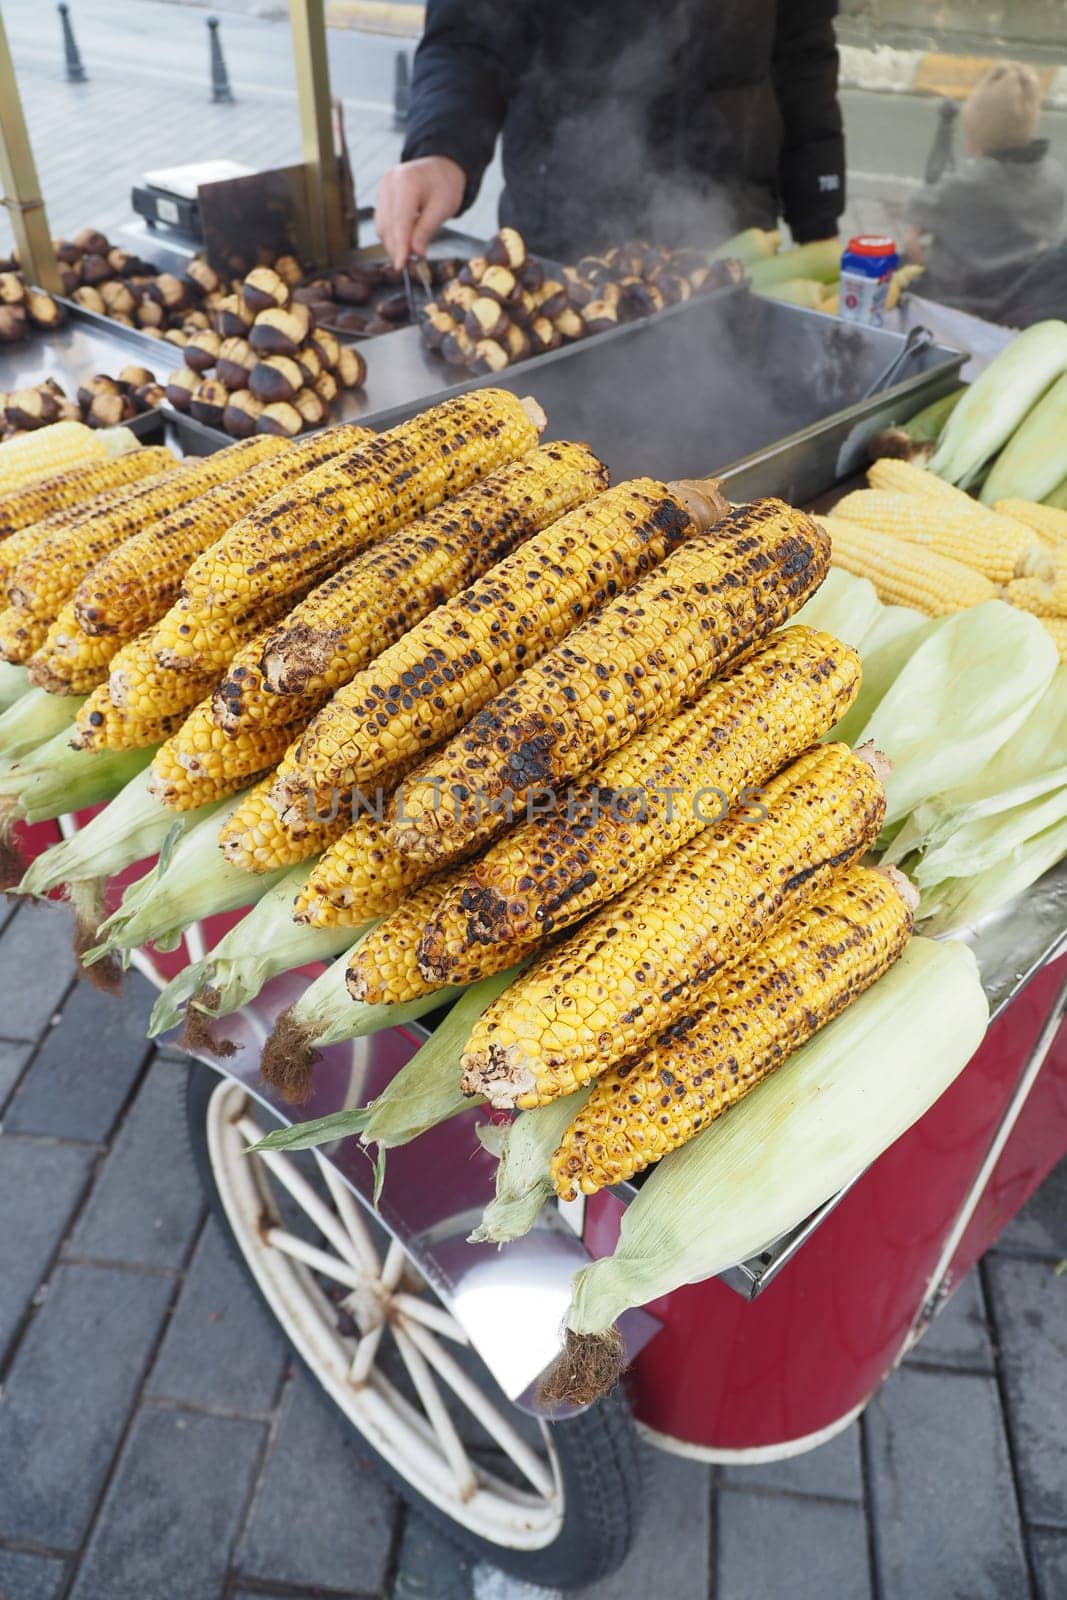 Yellow corn is baked or roasted on charcoal. Street food istanbul .